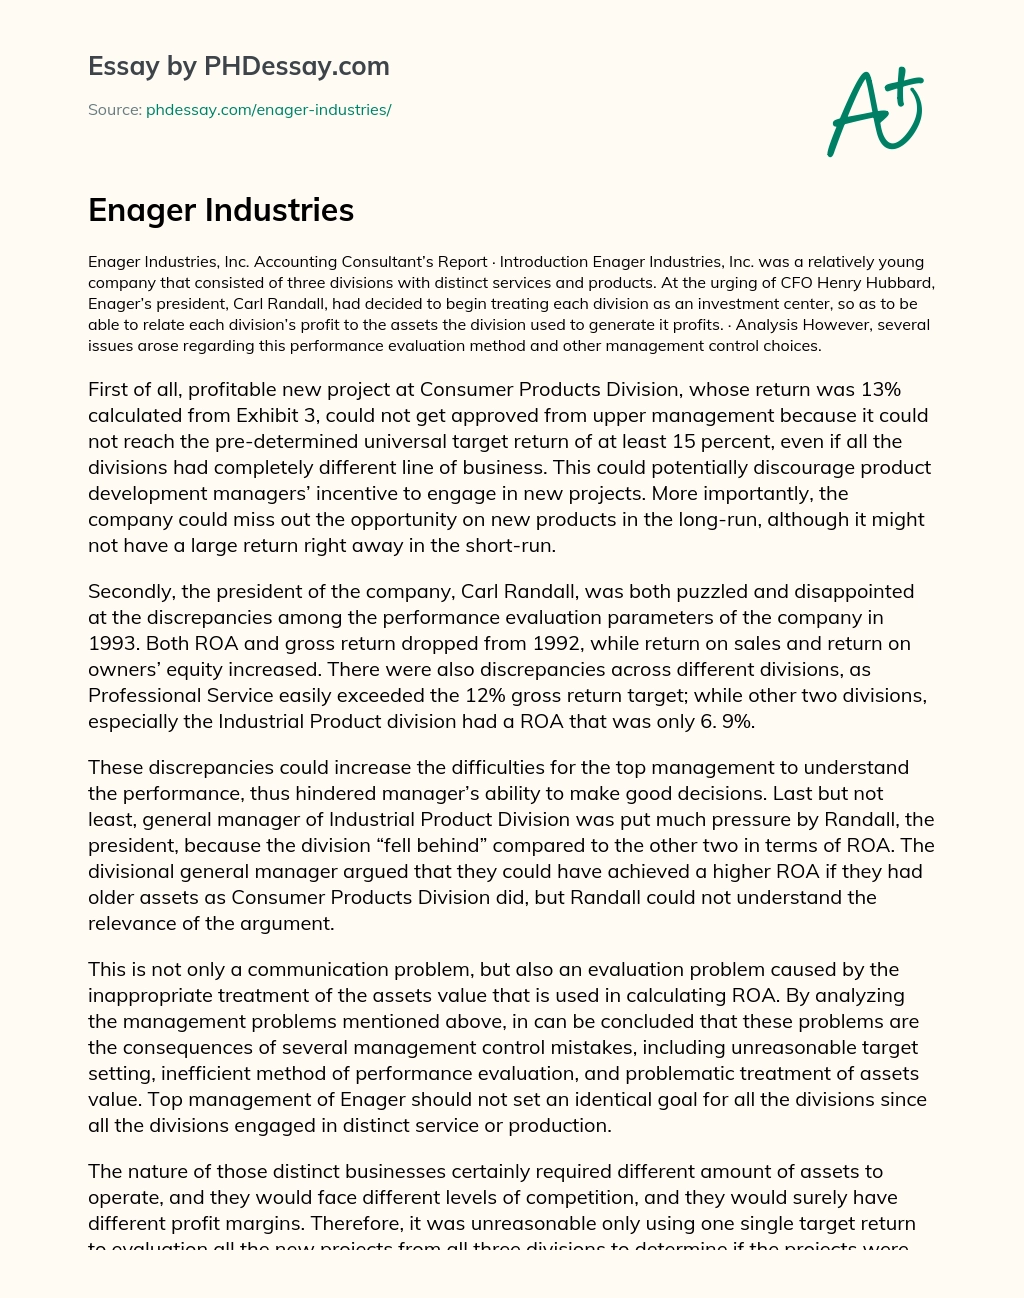 Enager Industries essay